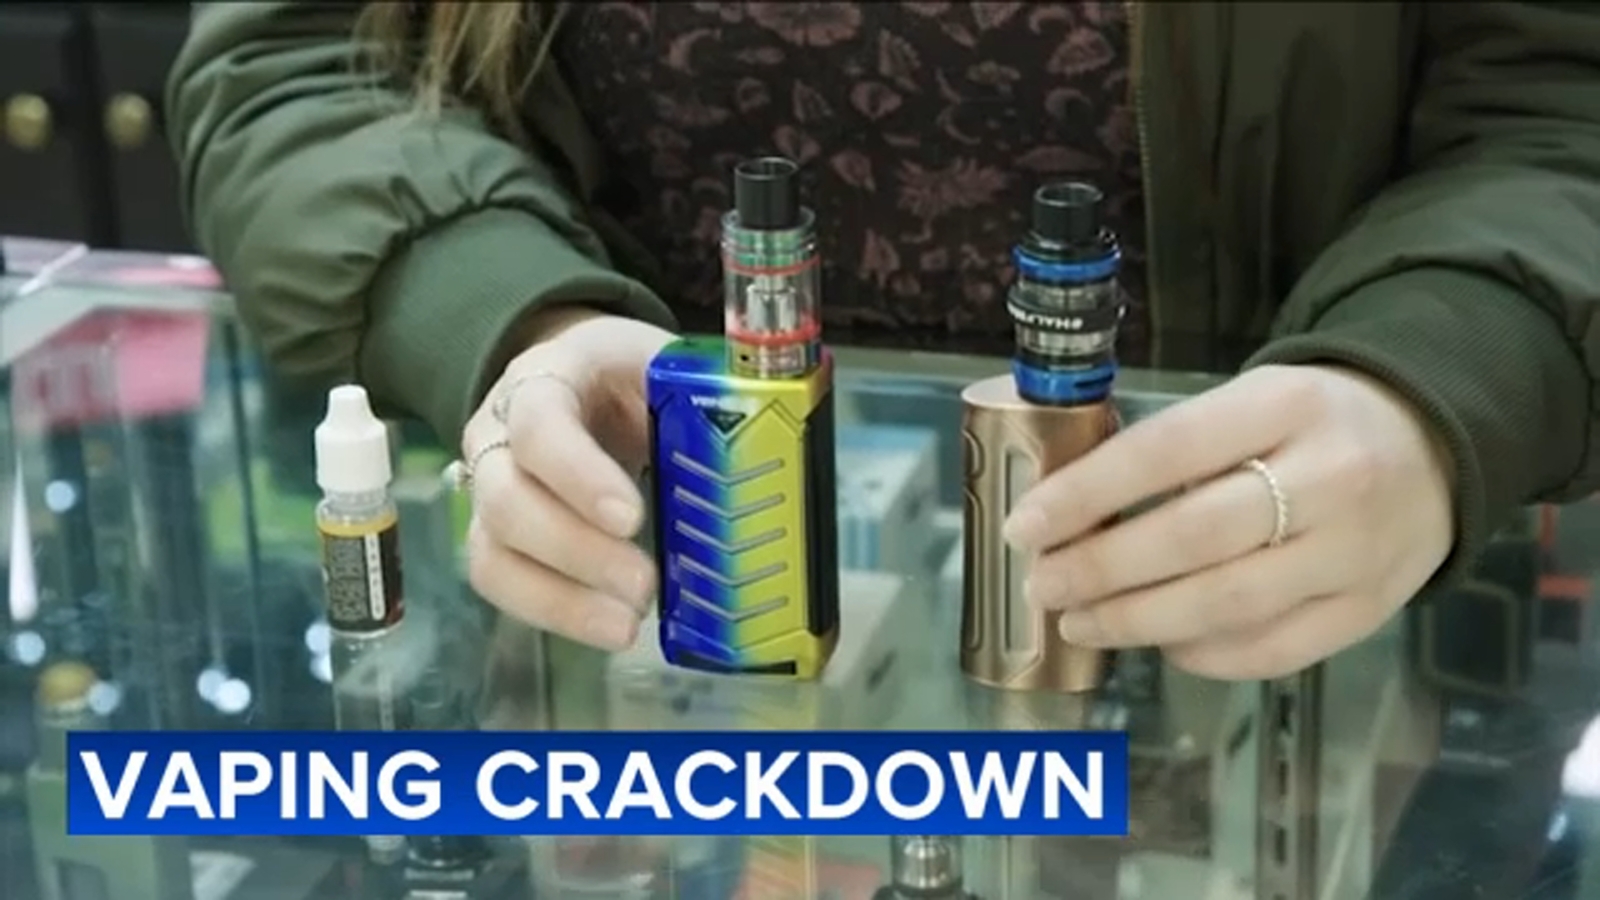 Suffolk County police cracking down on illegal vaping products for teenagers on Long Island [Video]